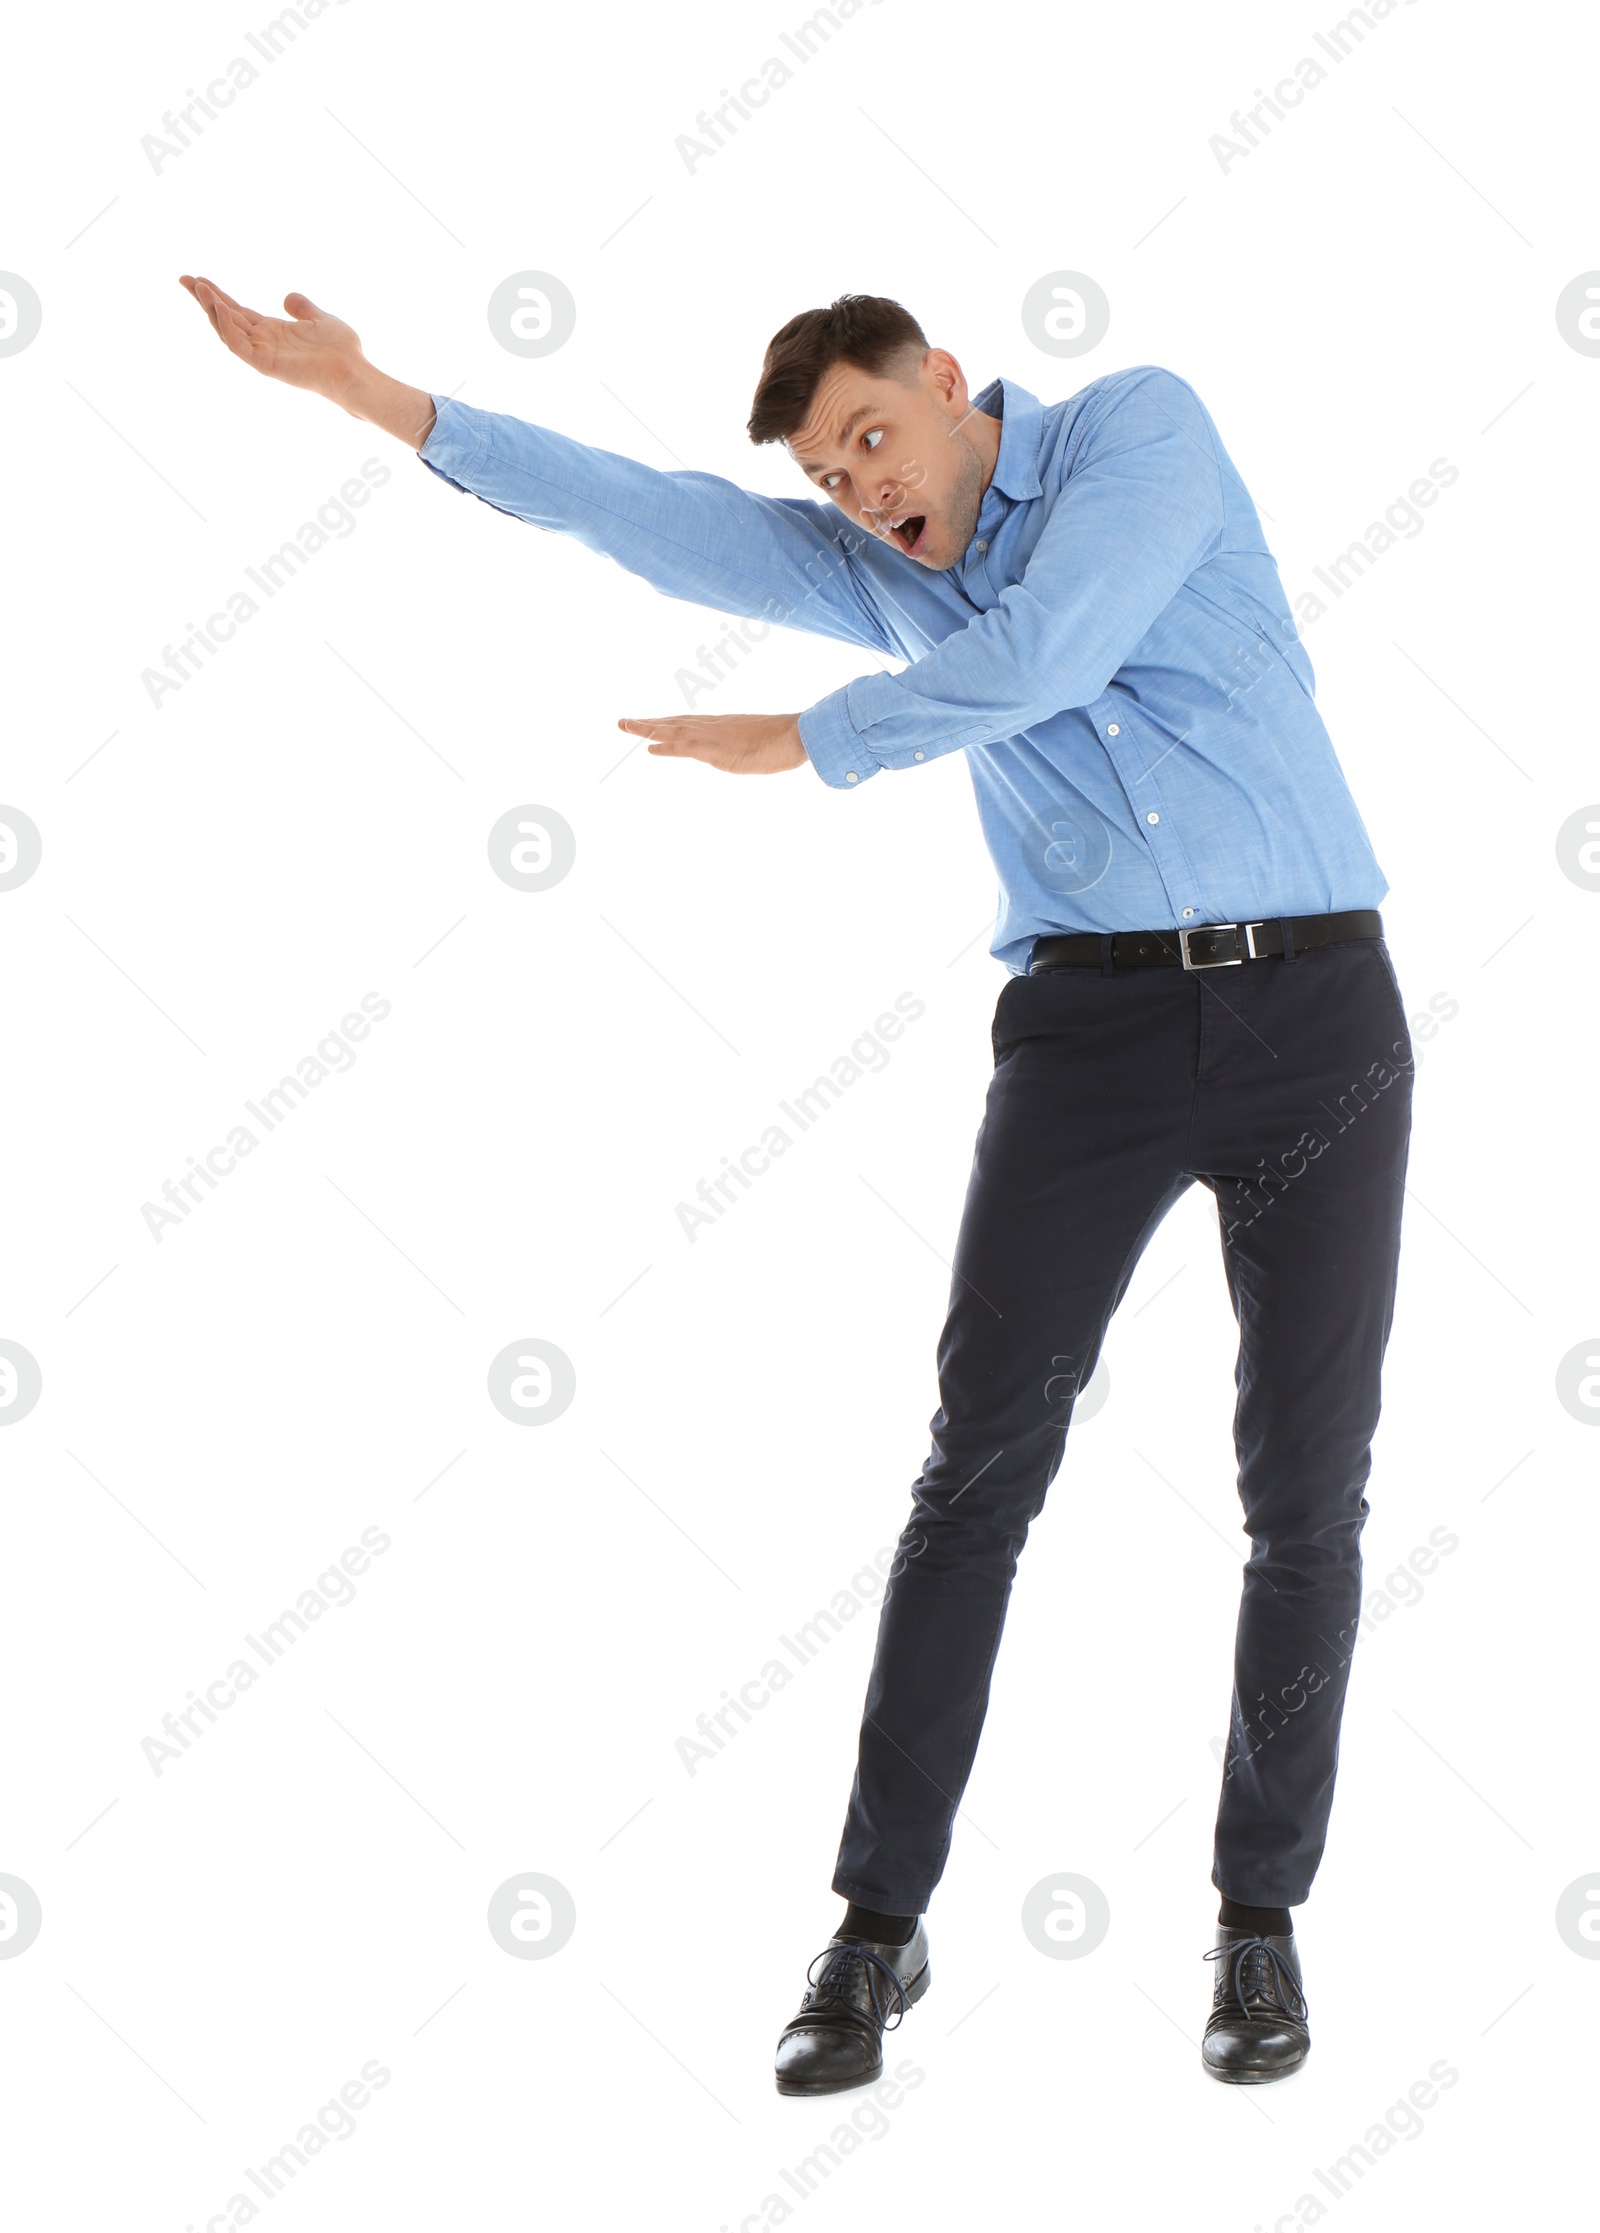 Photo of Emotional man in office wear posing on white background